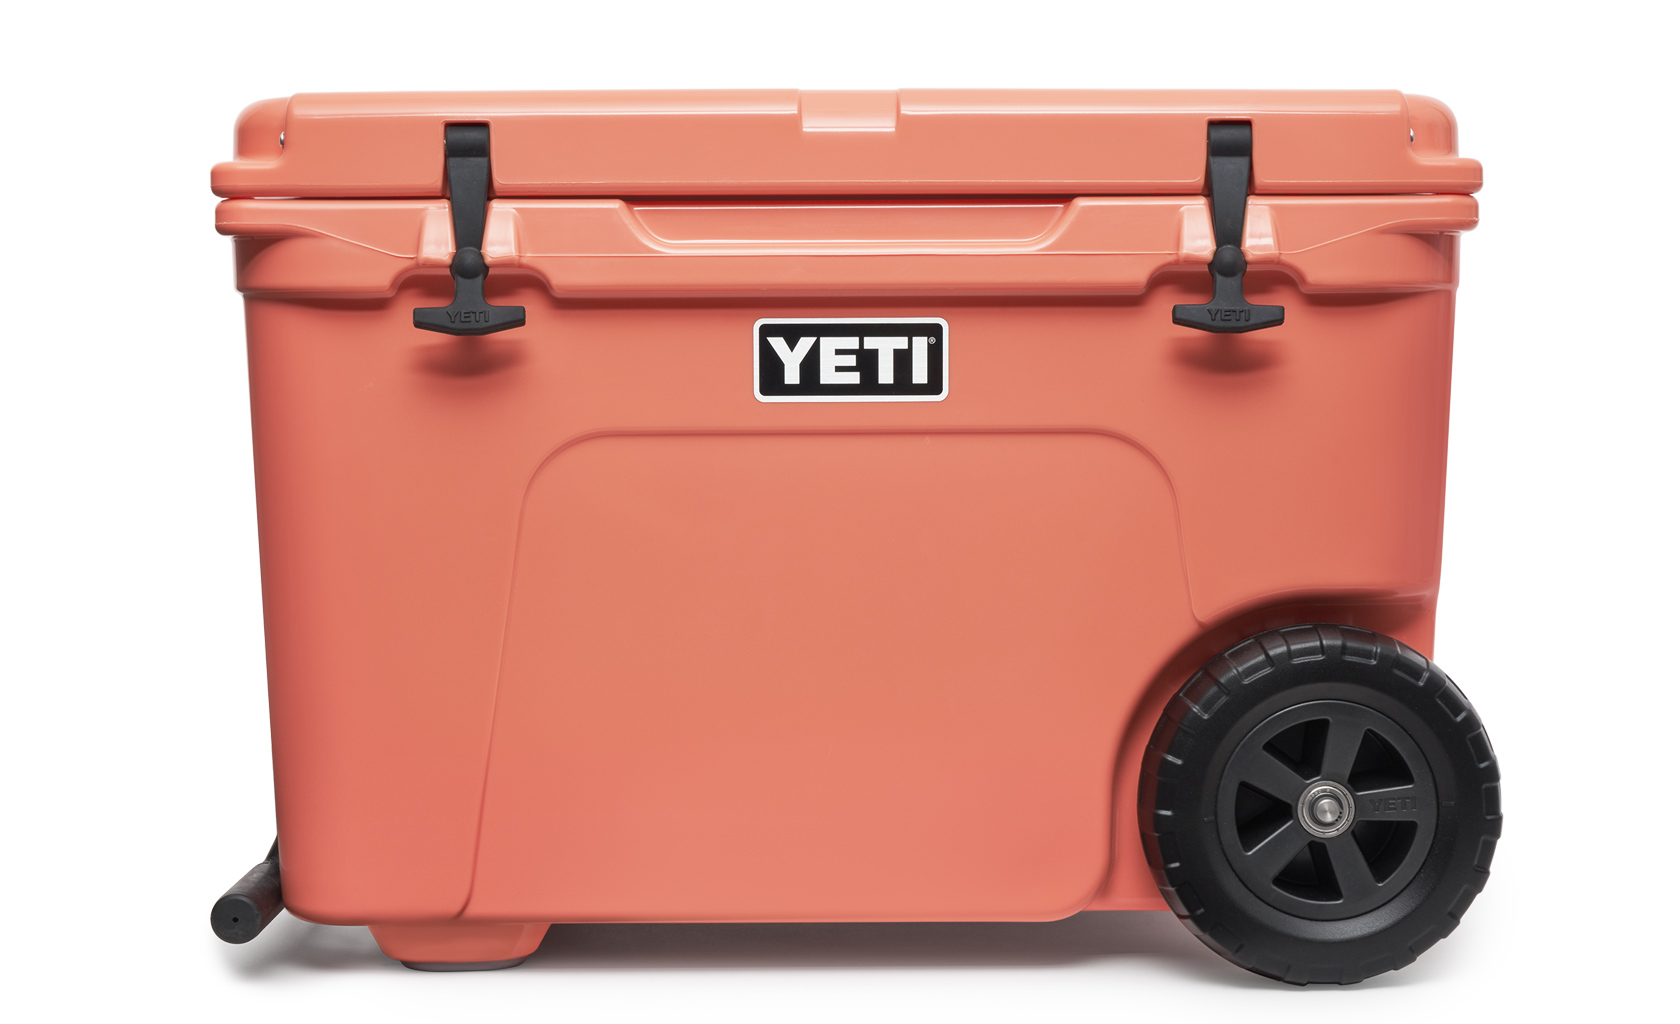 Customize my tundra haul today at the Yeti store in Carlsbad